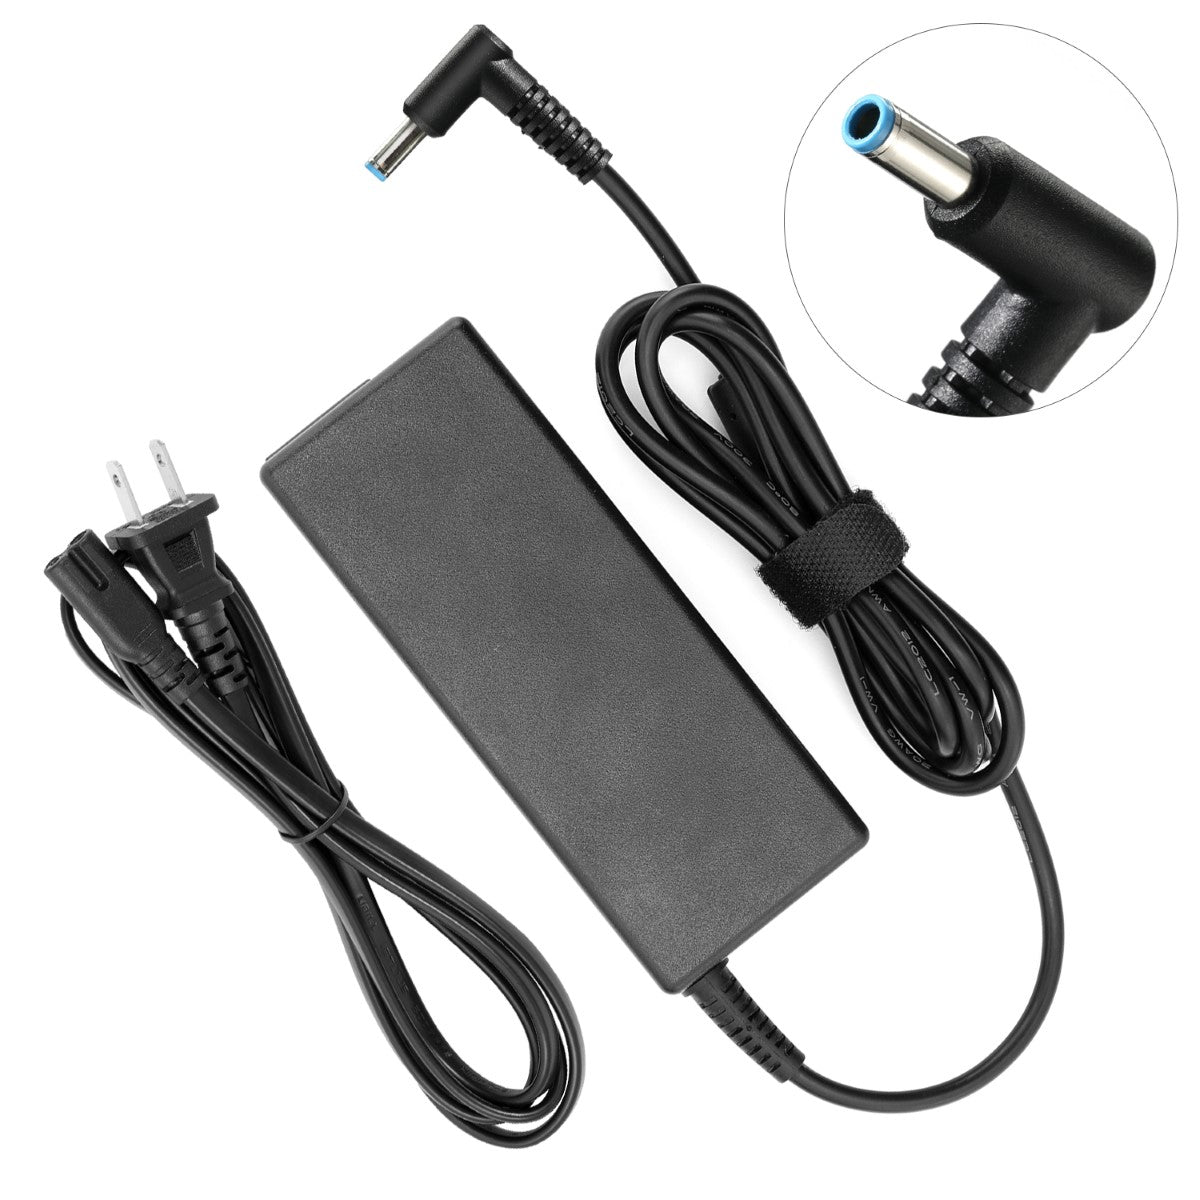 AC Adapter Charger for HP Pavilion 11-n011dx Notebook.